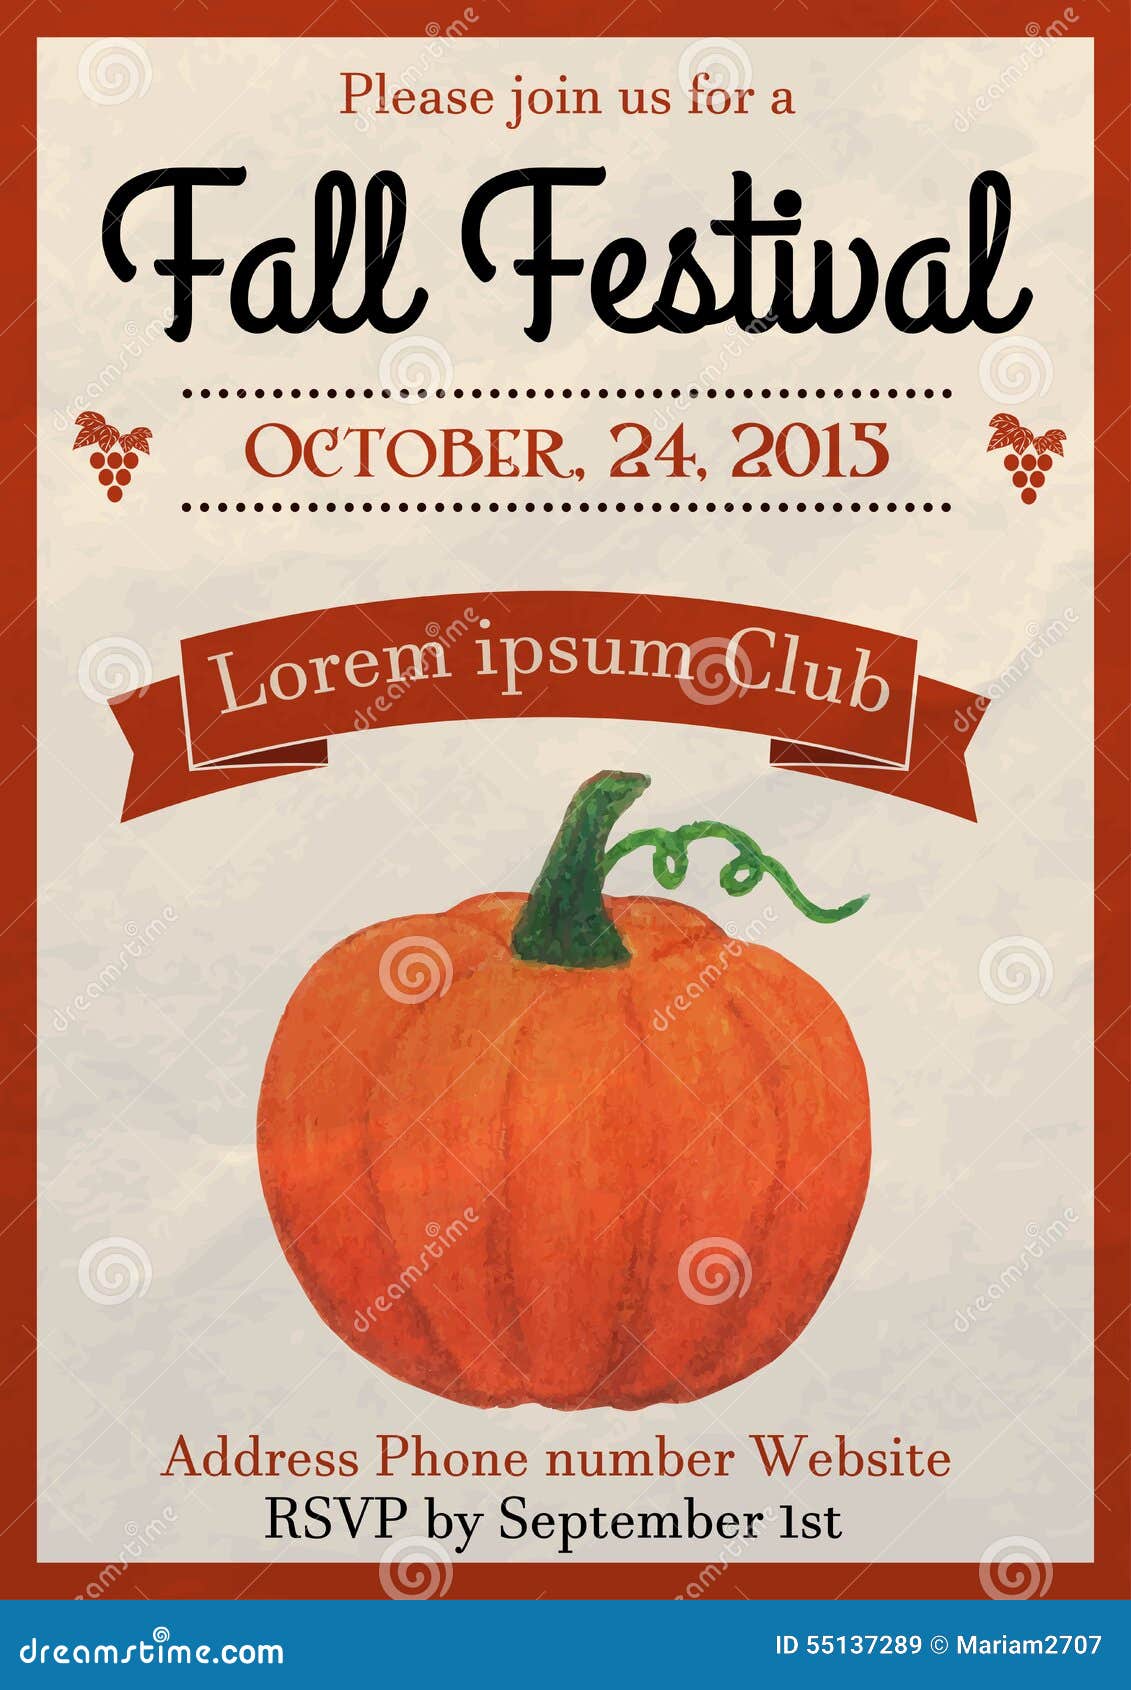 Fall Festival Flyer Free Template from thumbs.dreamstime.com